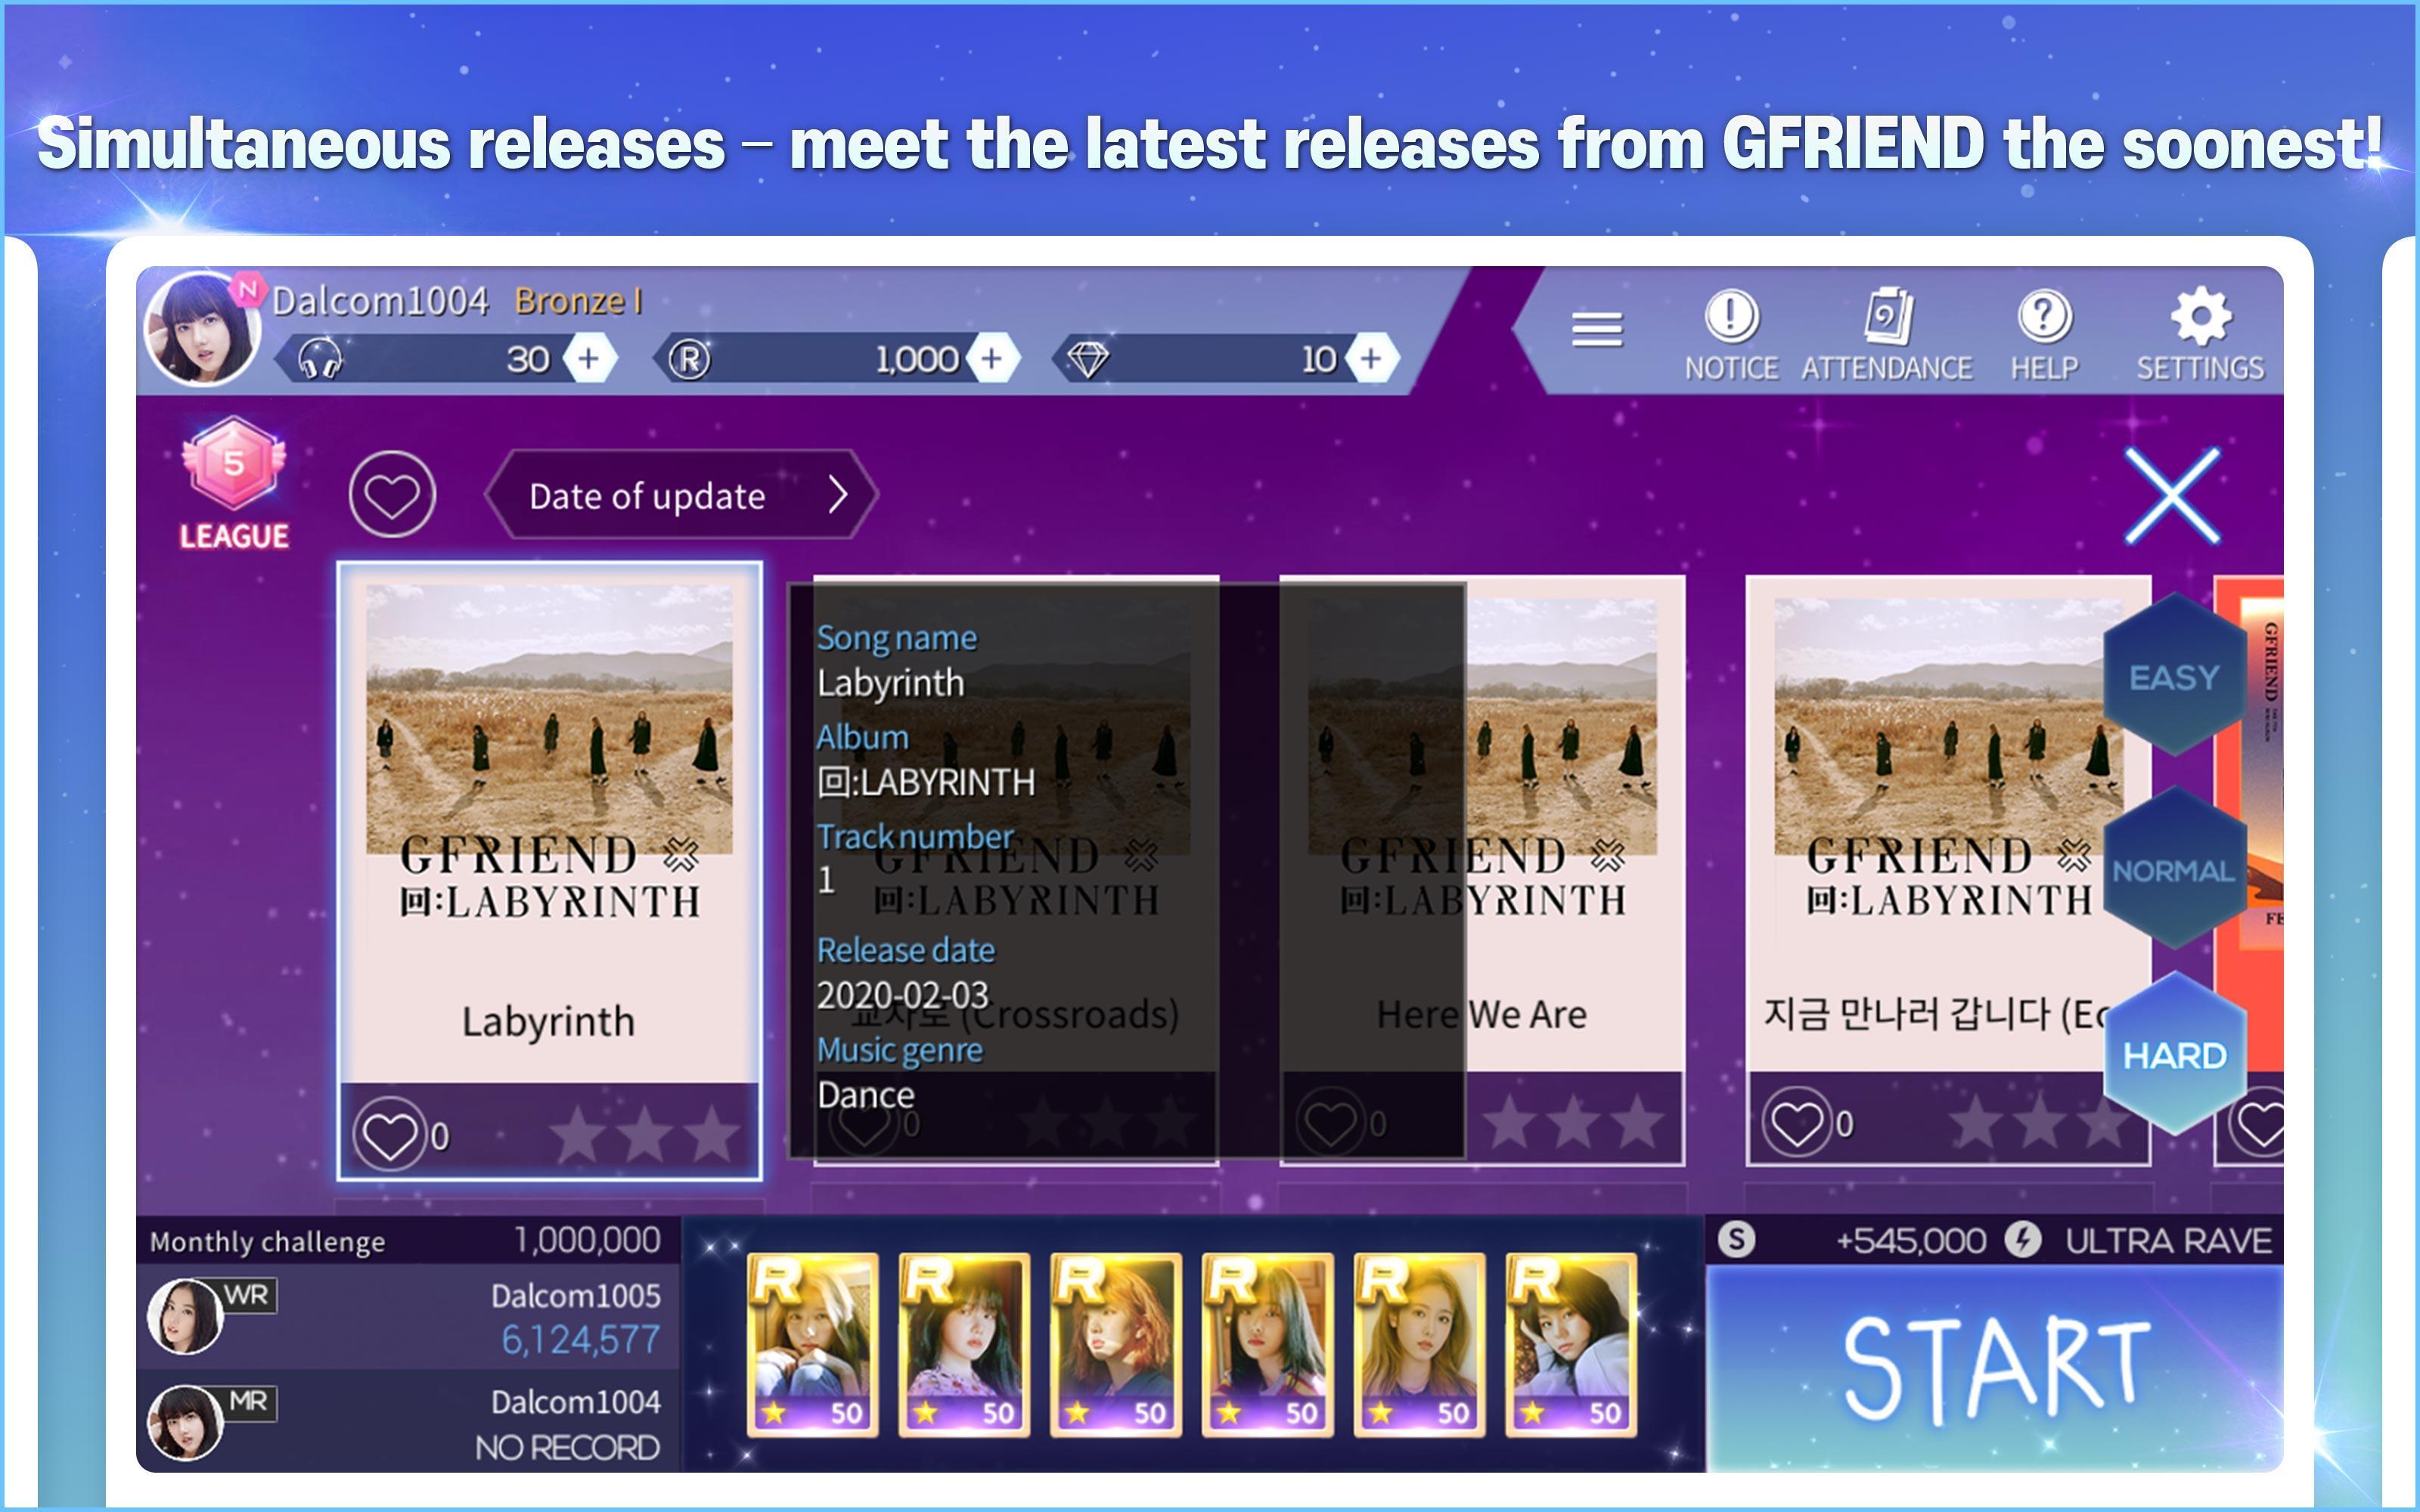 SuperStar GFRIEND for Android - APK Download